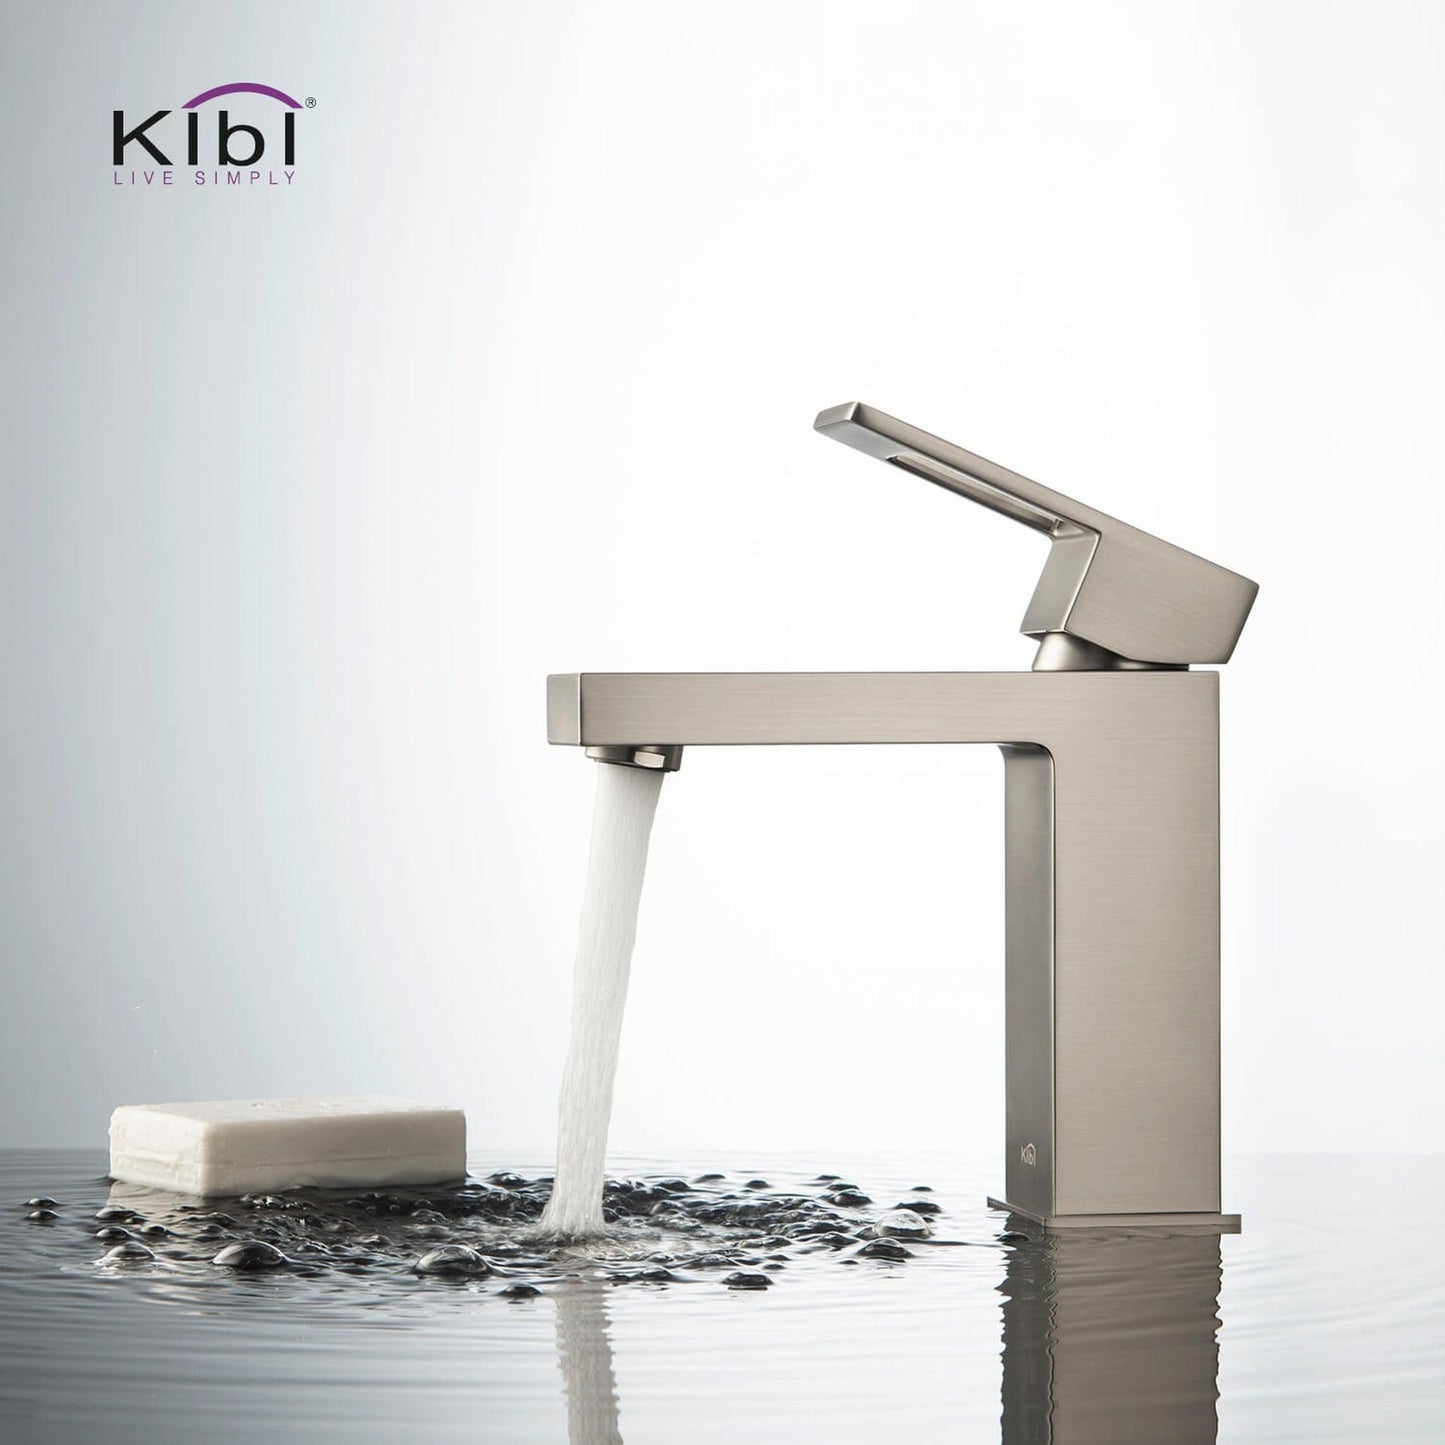 KIBI Cubic Single Handle Brushed Nickel Solid Brass Bathroom Vanity Sink Faucet With Pop-Up Drain Stopper Small Cover With Overflow